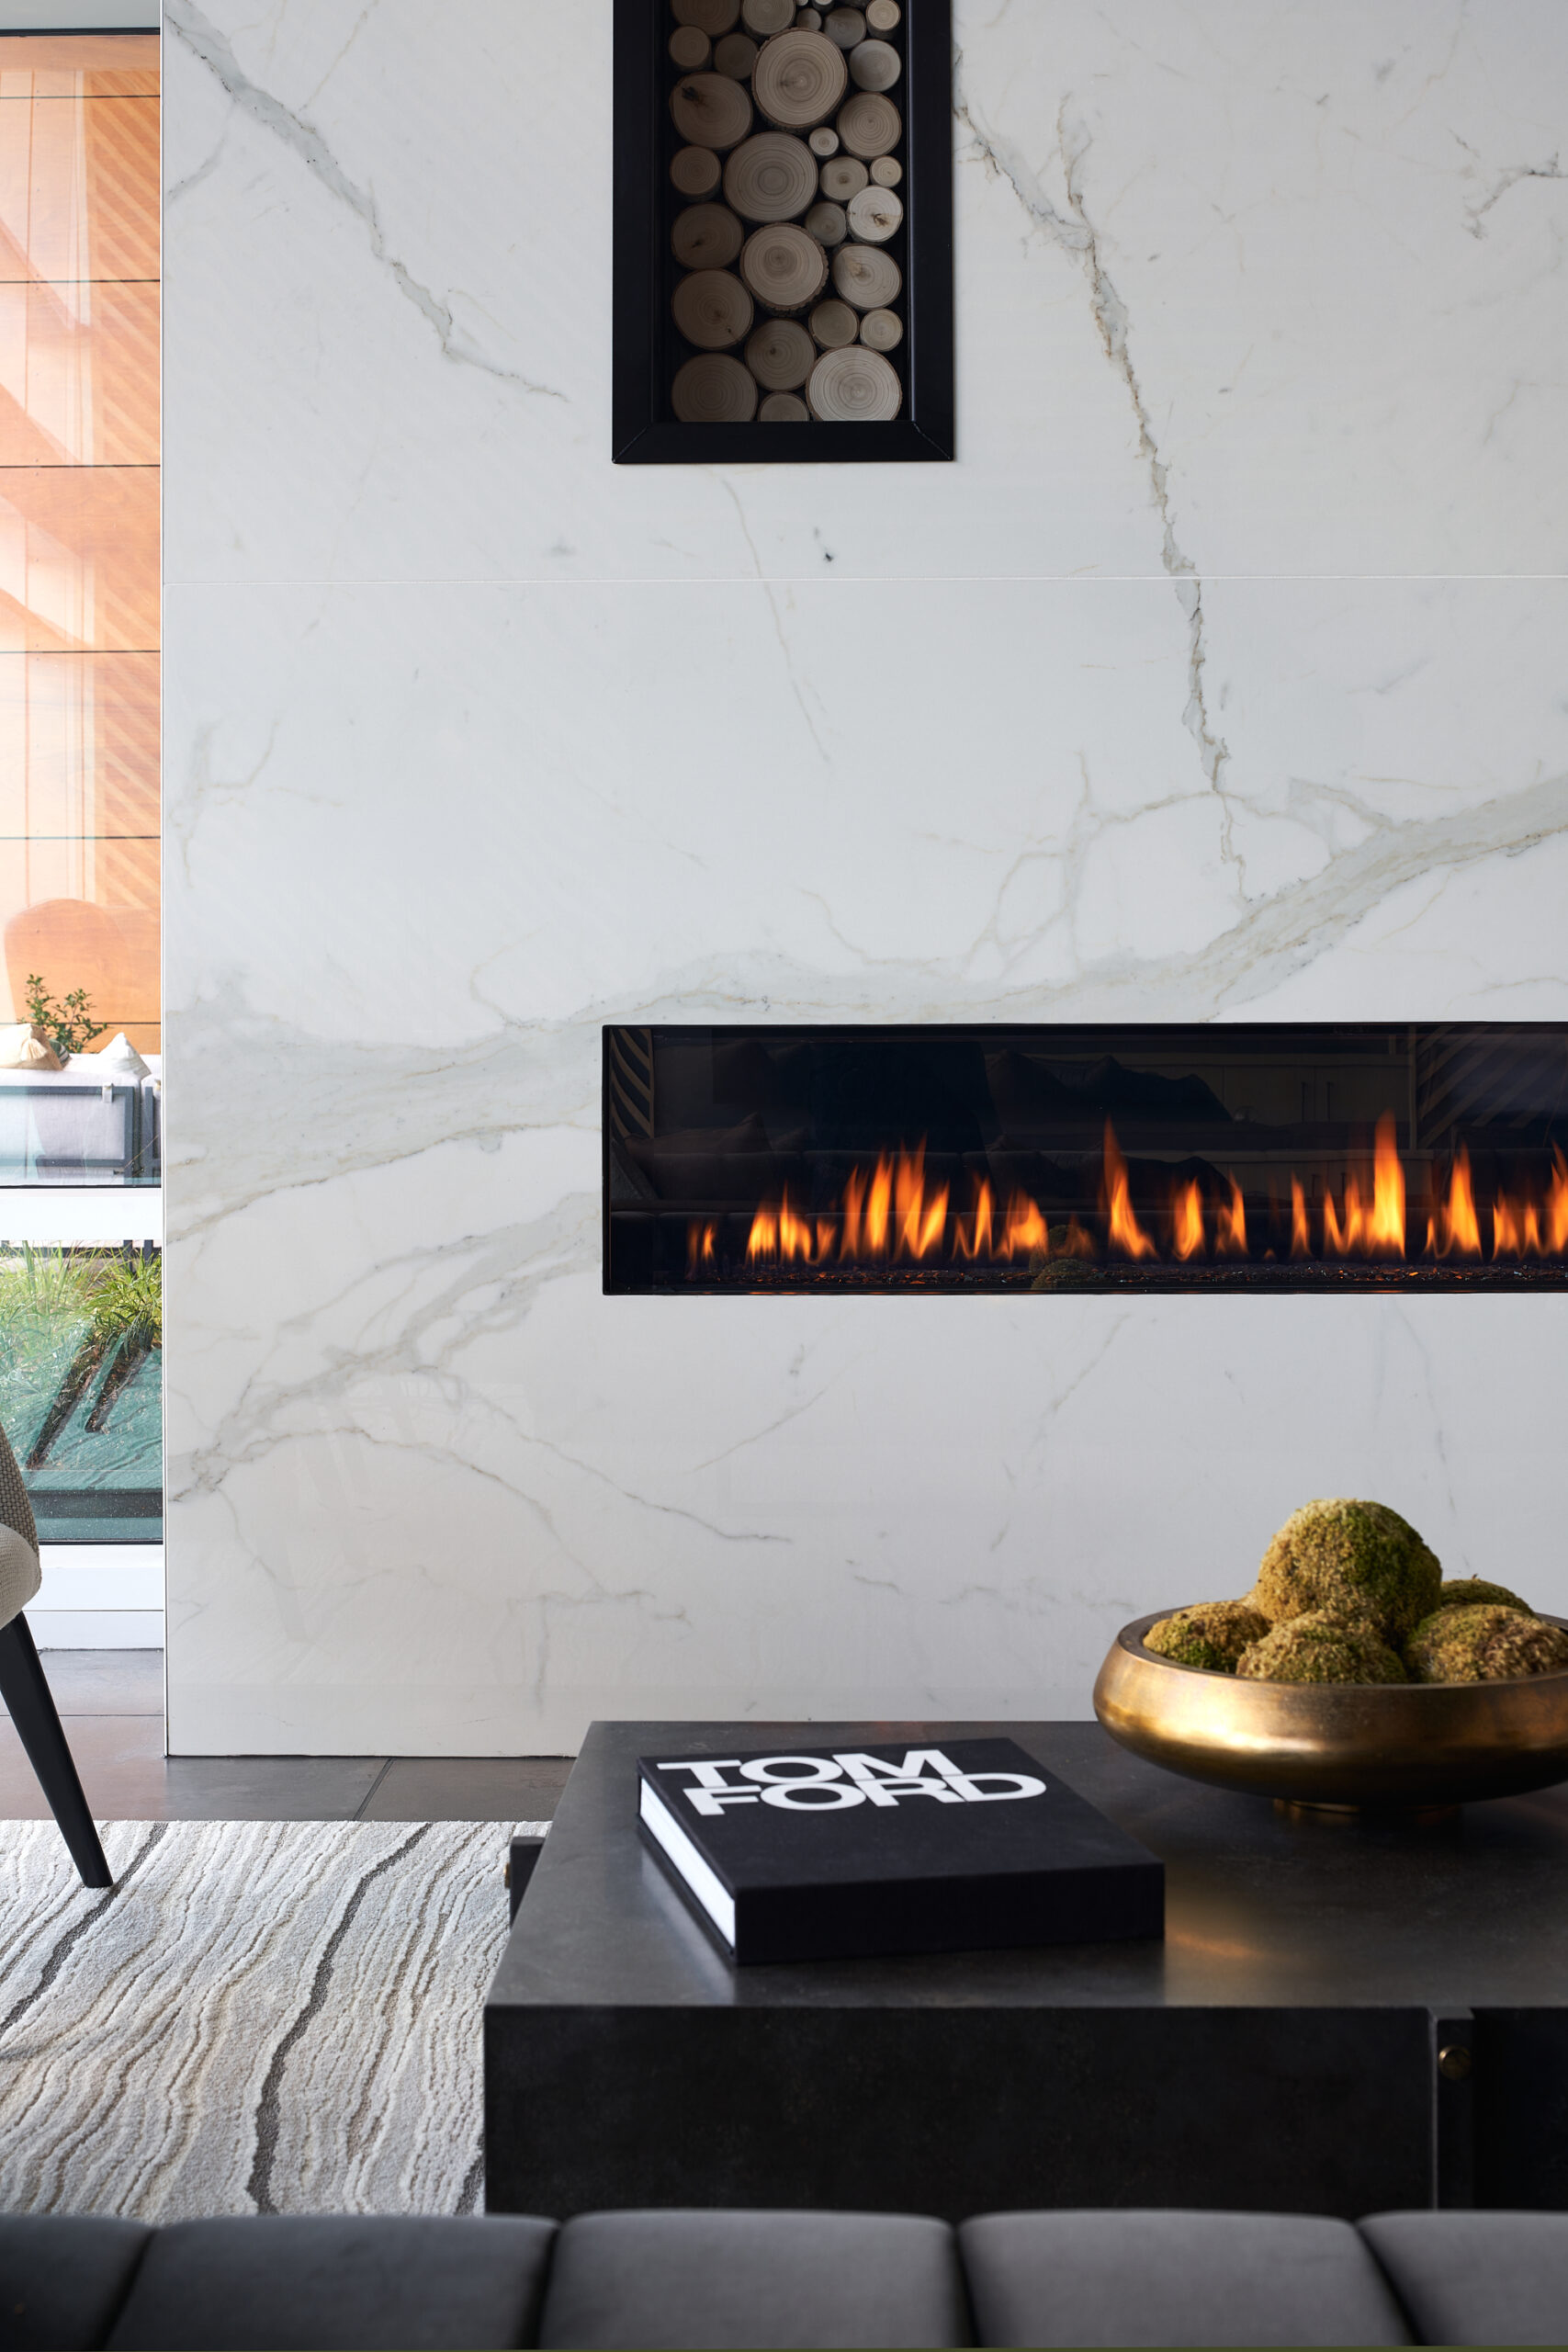 Lit fire place in marble wall behind coffee table with Tom Ford book